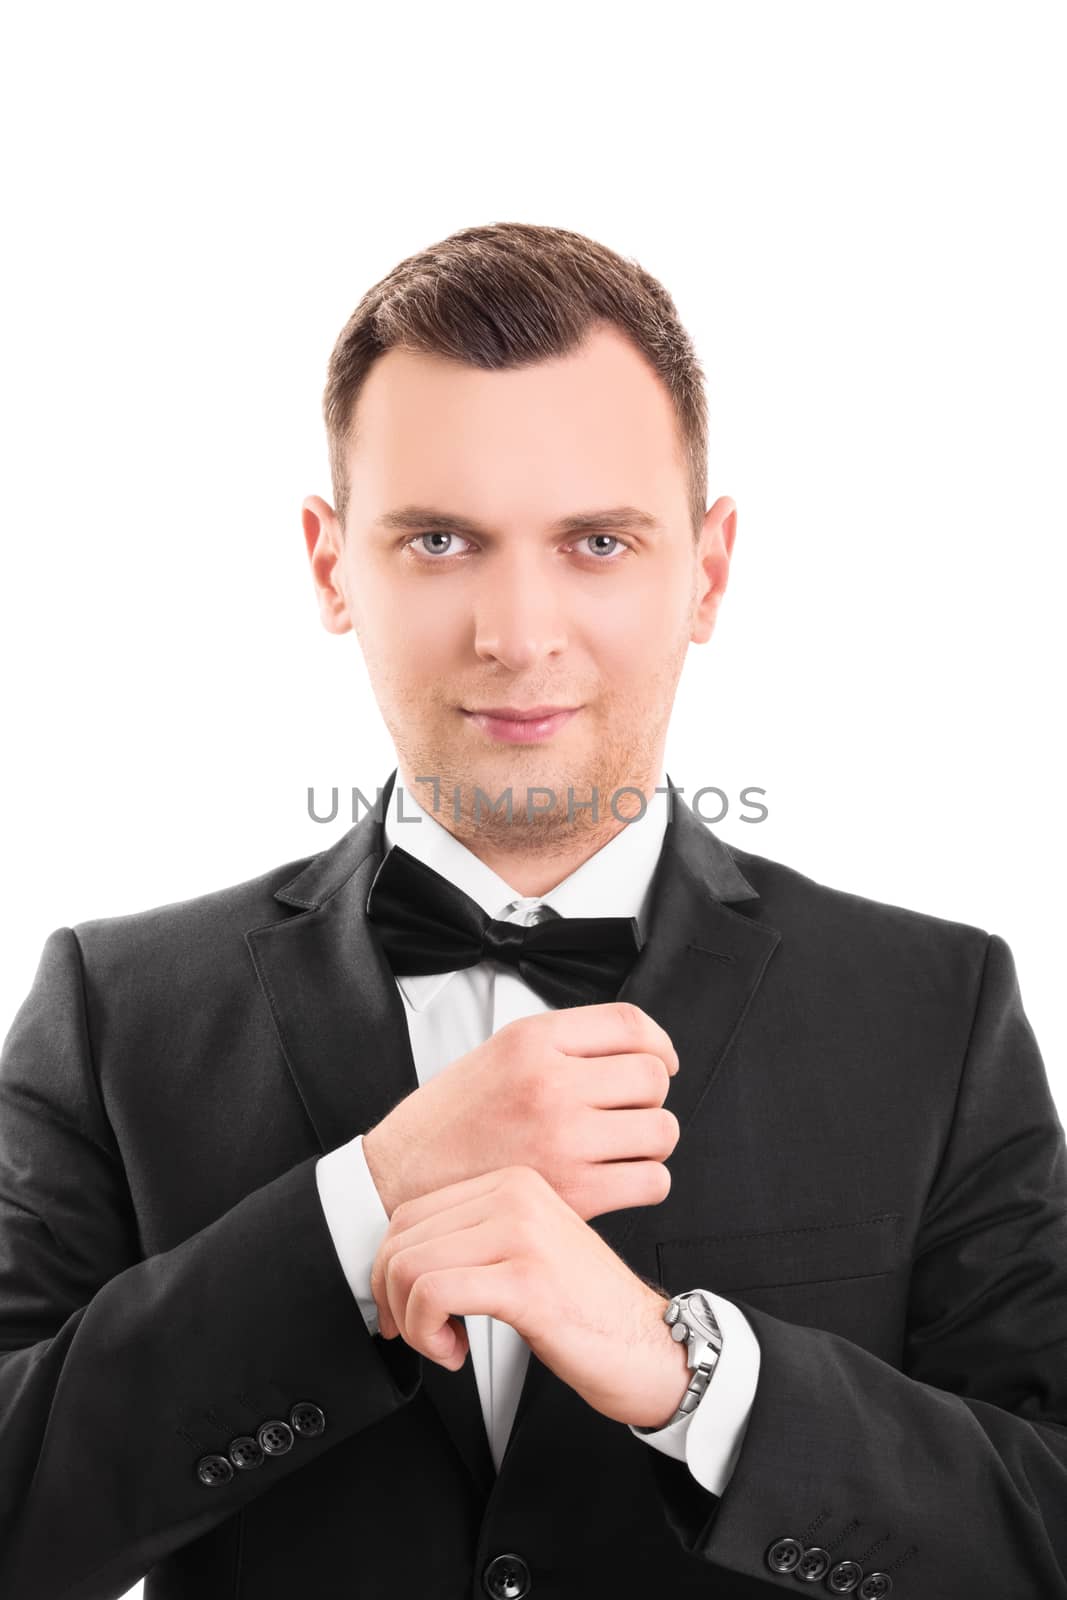 Close up portrait of a confident, stunning, trendy, attractive, dreamy, perfect man in black suit with bow tie, adjusting the cufflinks on his white shirt, looking at the camera, isolated on a white background.